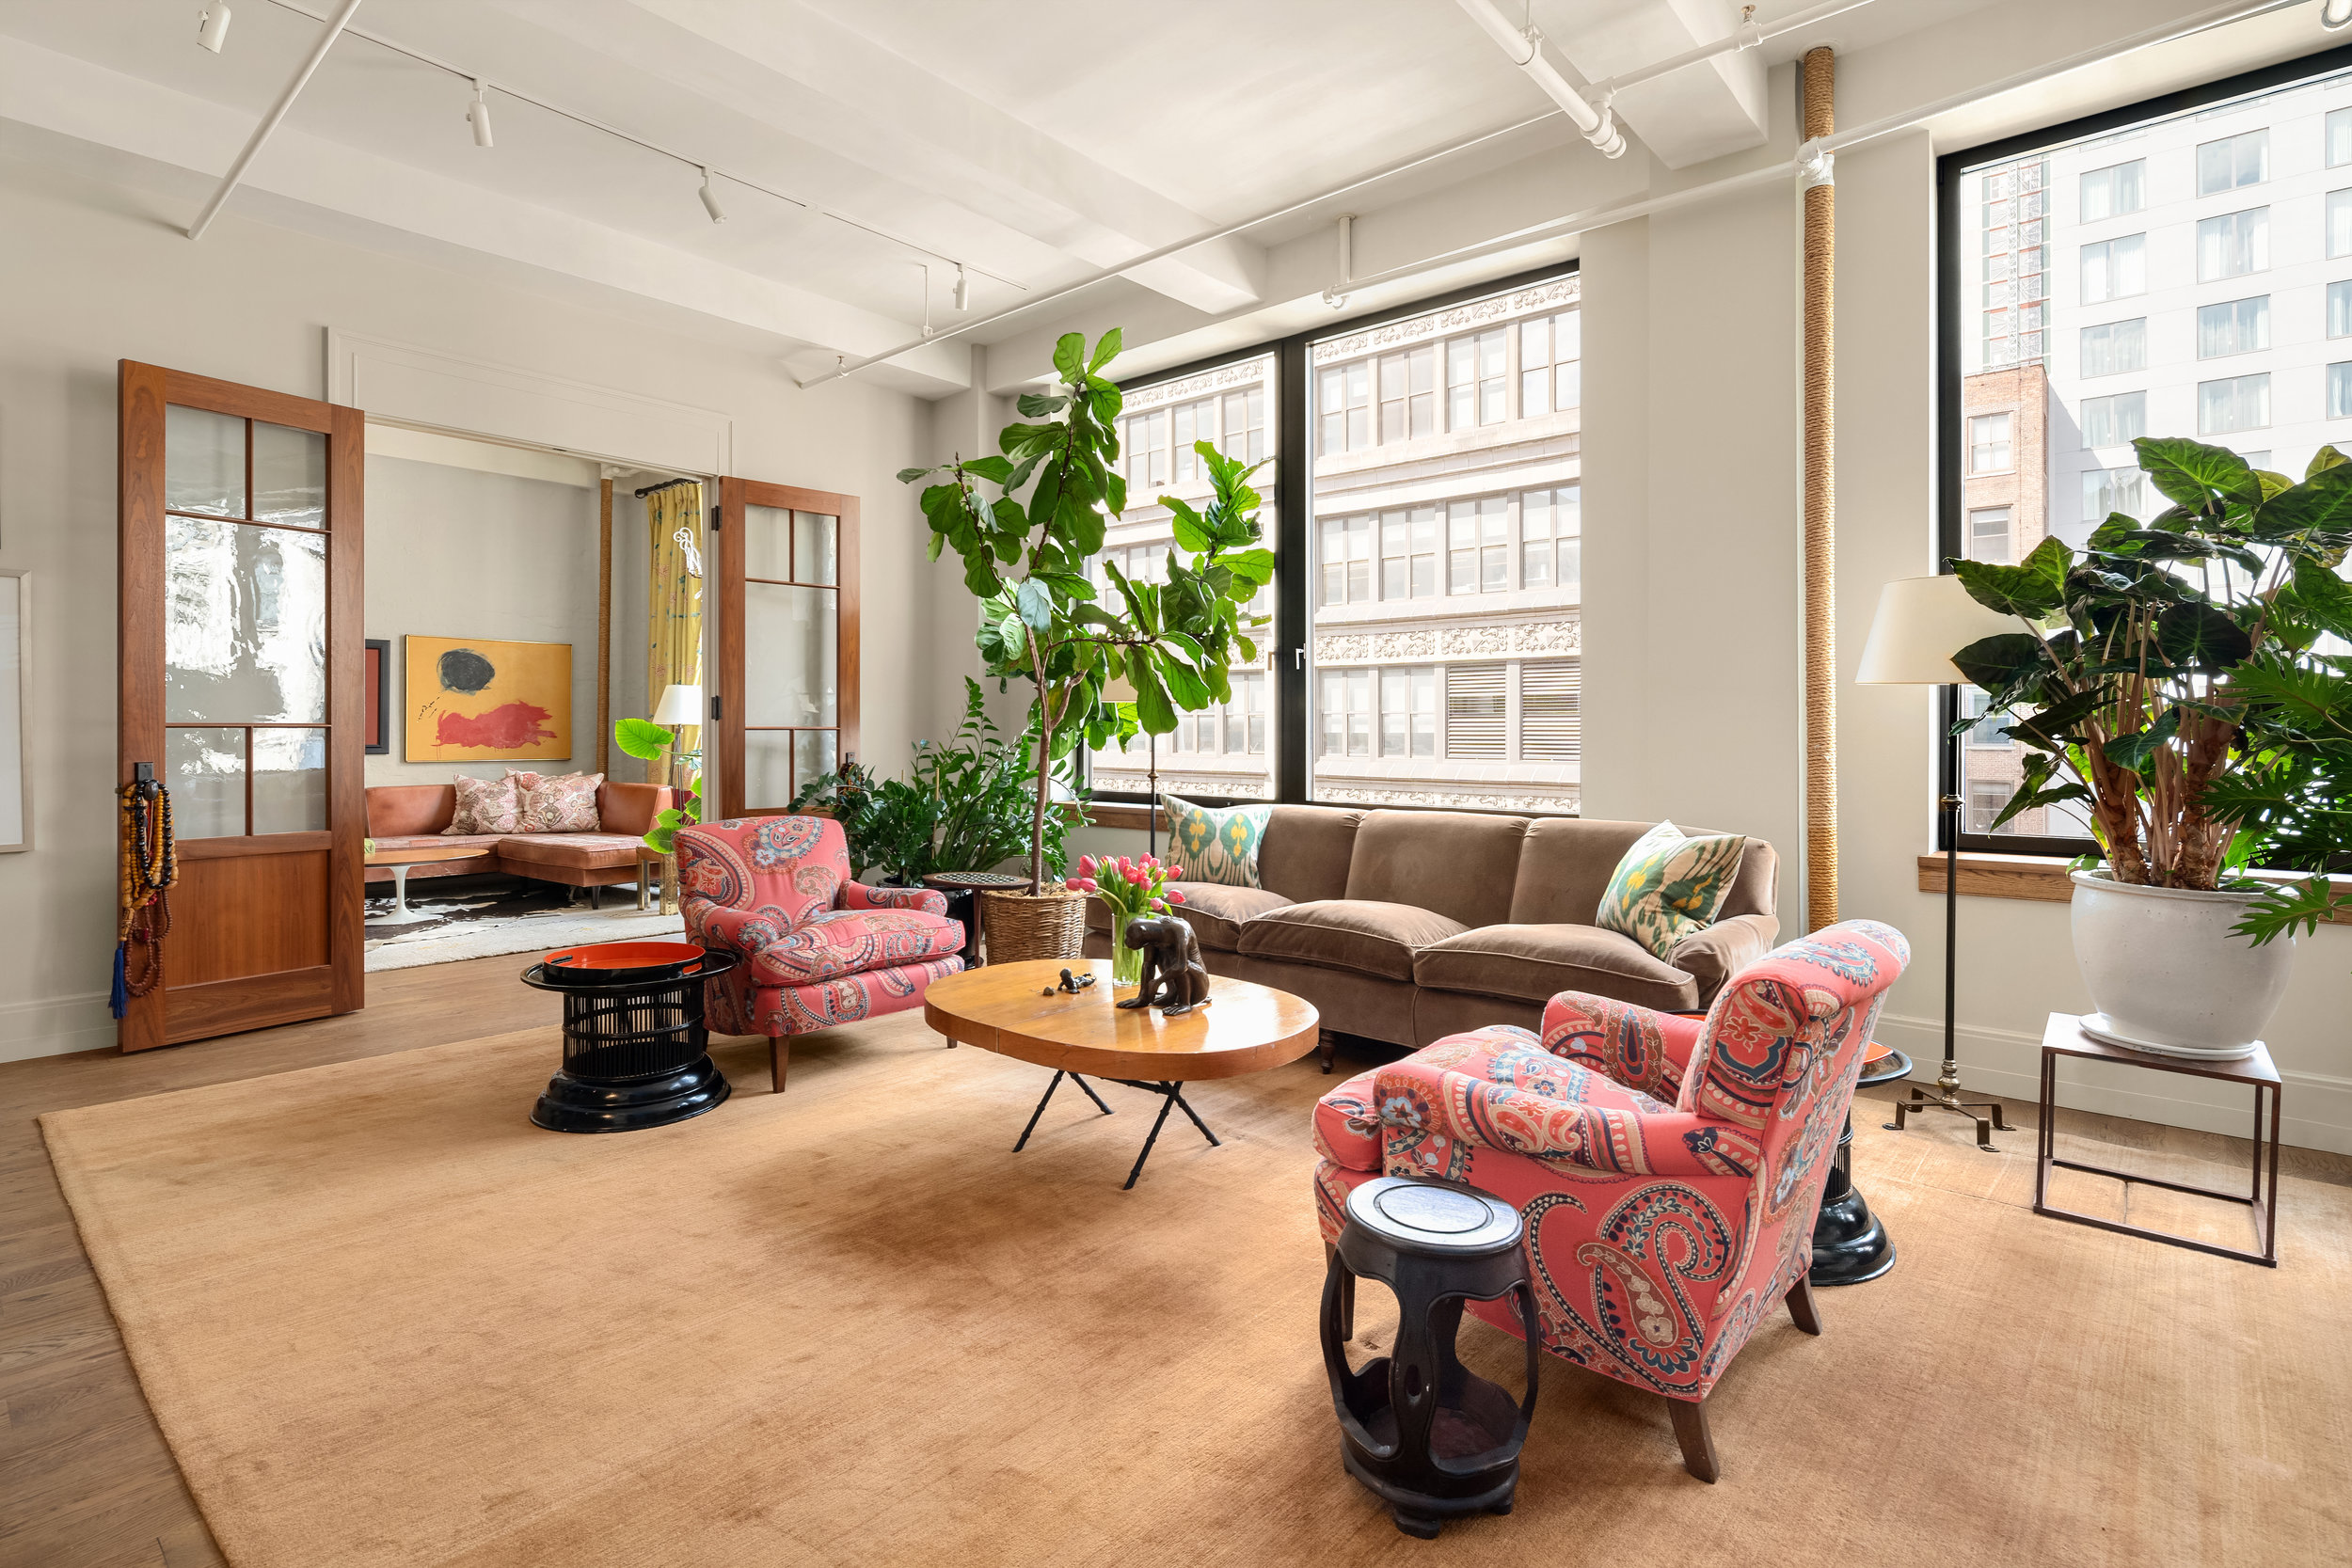 142West26thStreet9-ChelseaNewYork_Holly_Parker_DouglasElliman_Photography_79379195_high_res.jpg